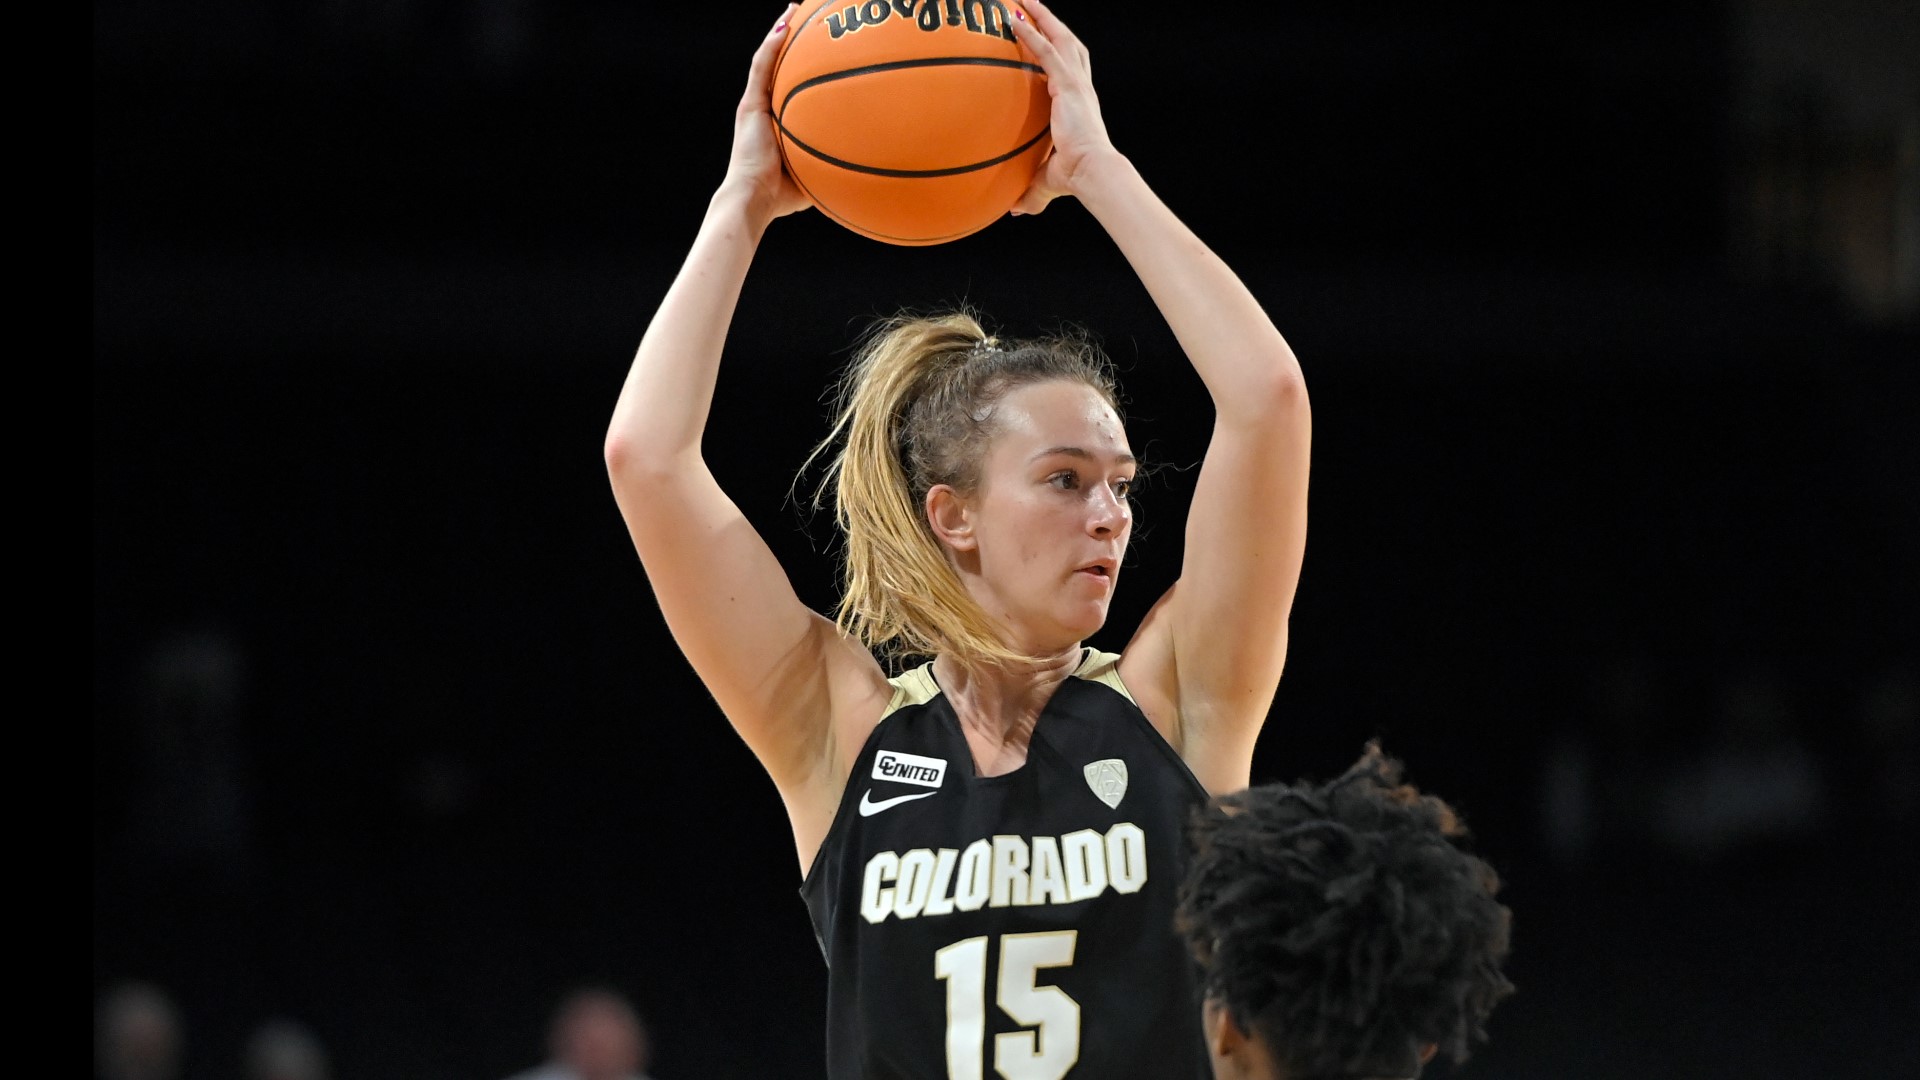 Kindyll Wetta, a Valor Christian graduate, is the only Colorado native on the CU women's basketball team. Both she and her high school coach hope that changes soon.